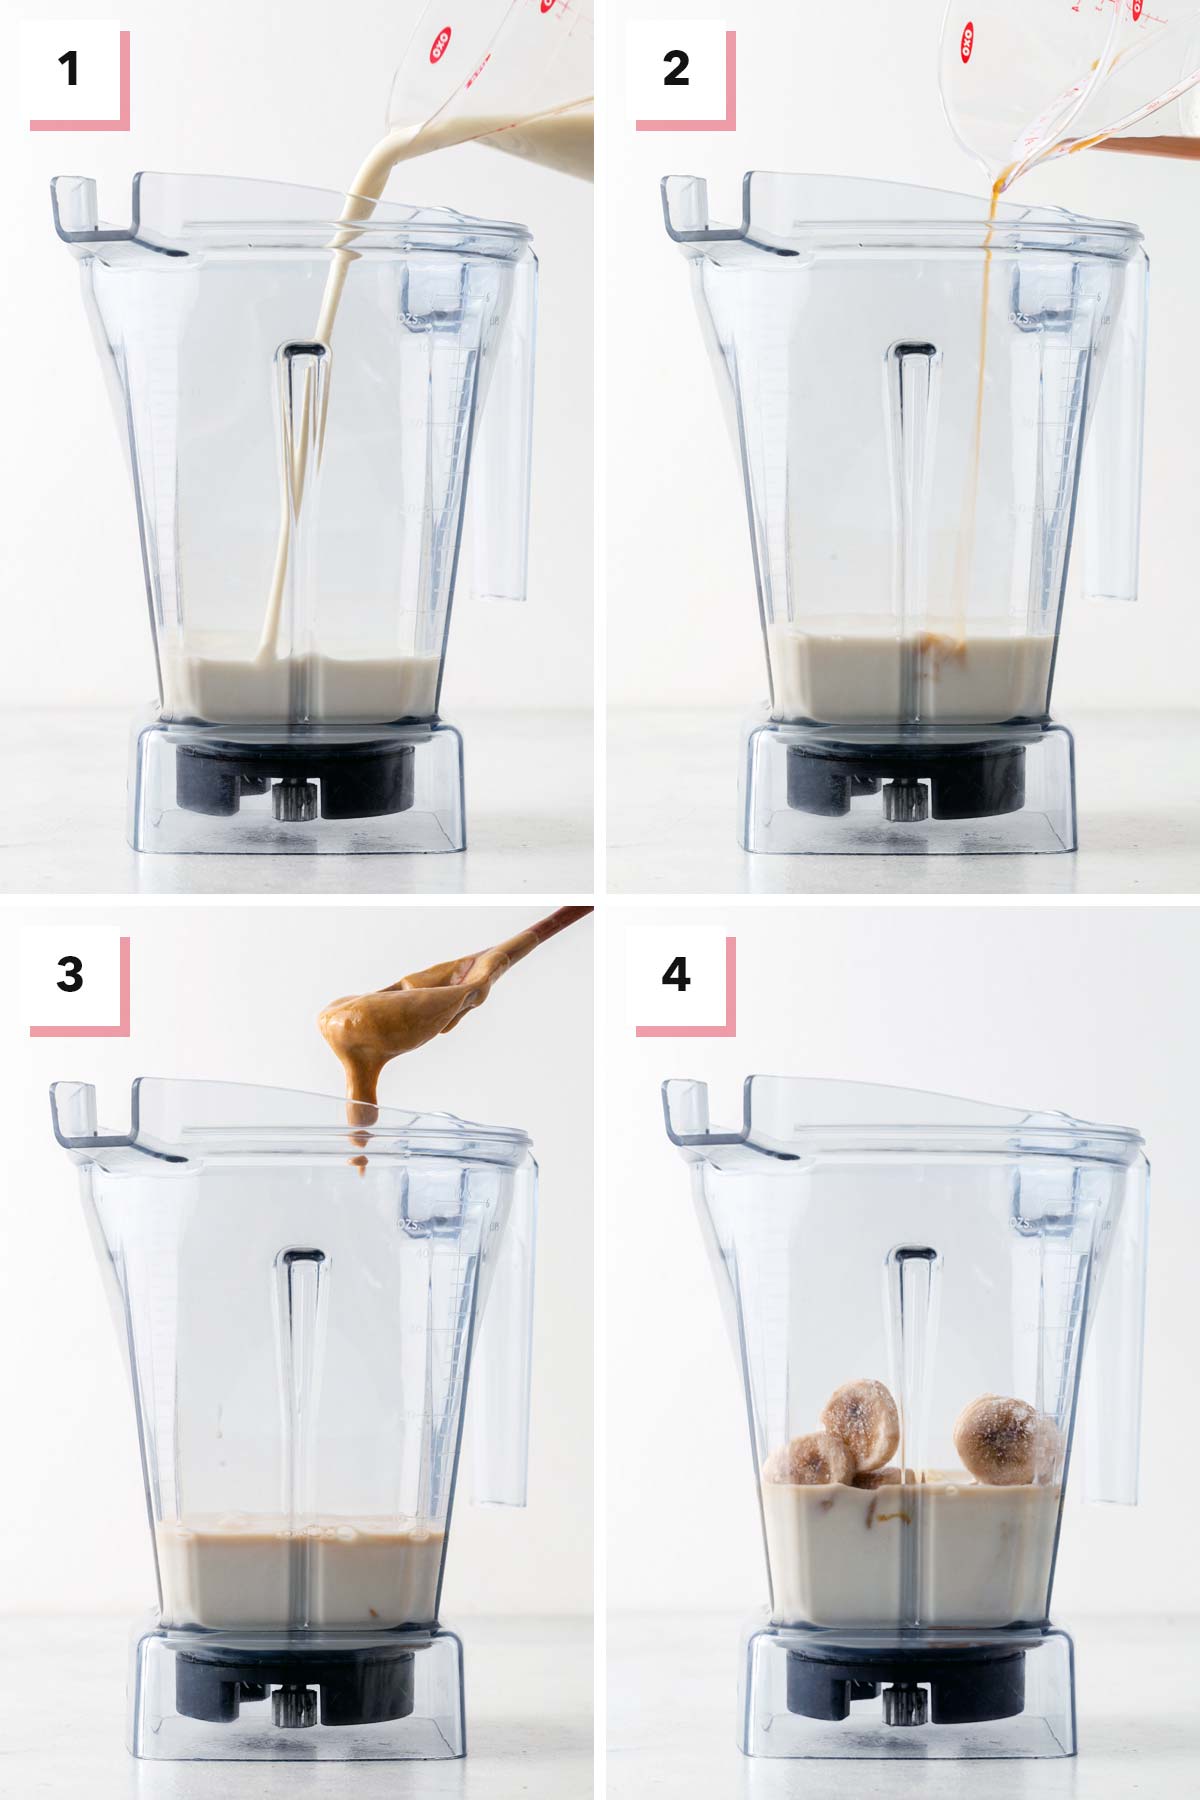 Steps for making a peanut butter banana smoothie.